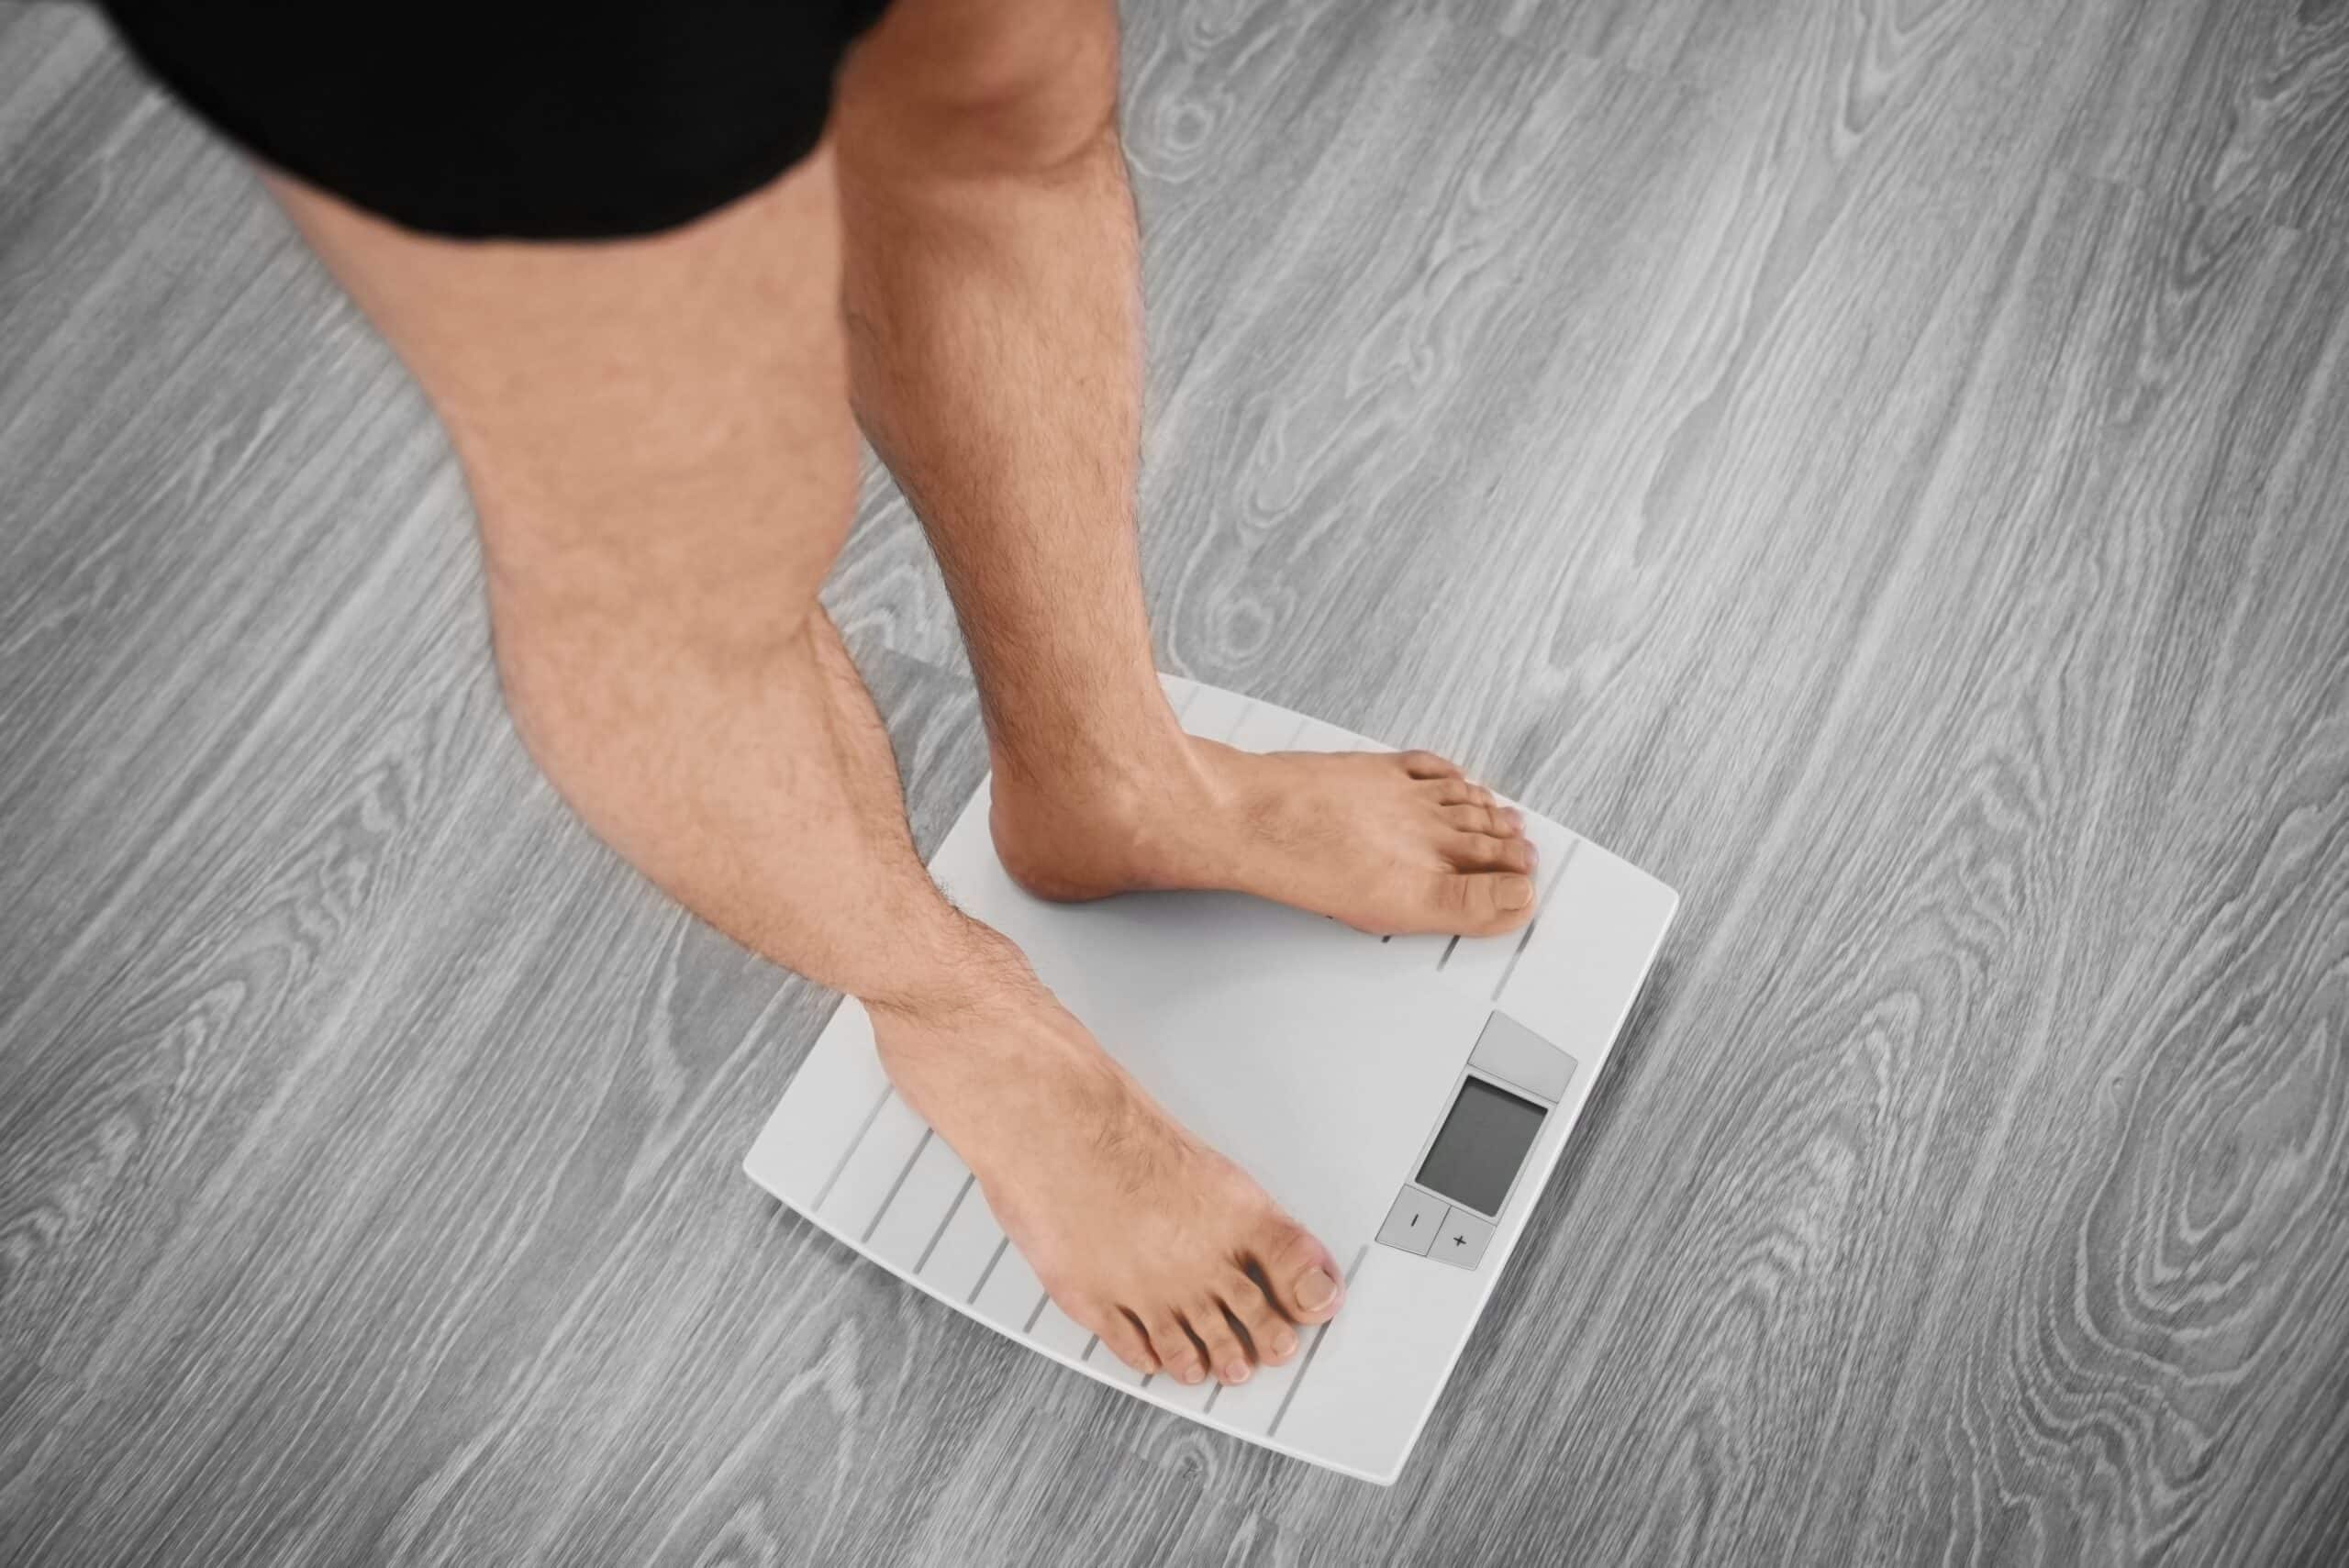 The Impact of Weight Loss on Male Fertility: Shedding Excess Pounds